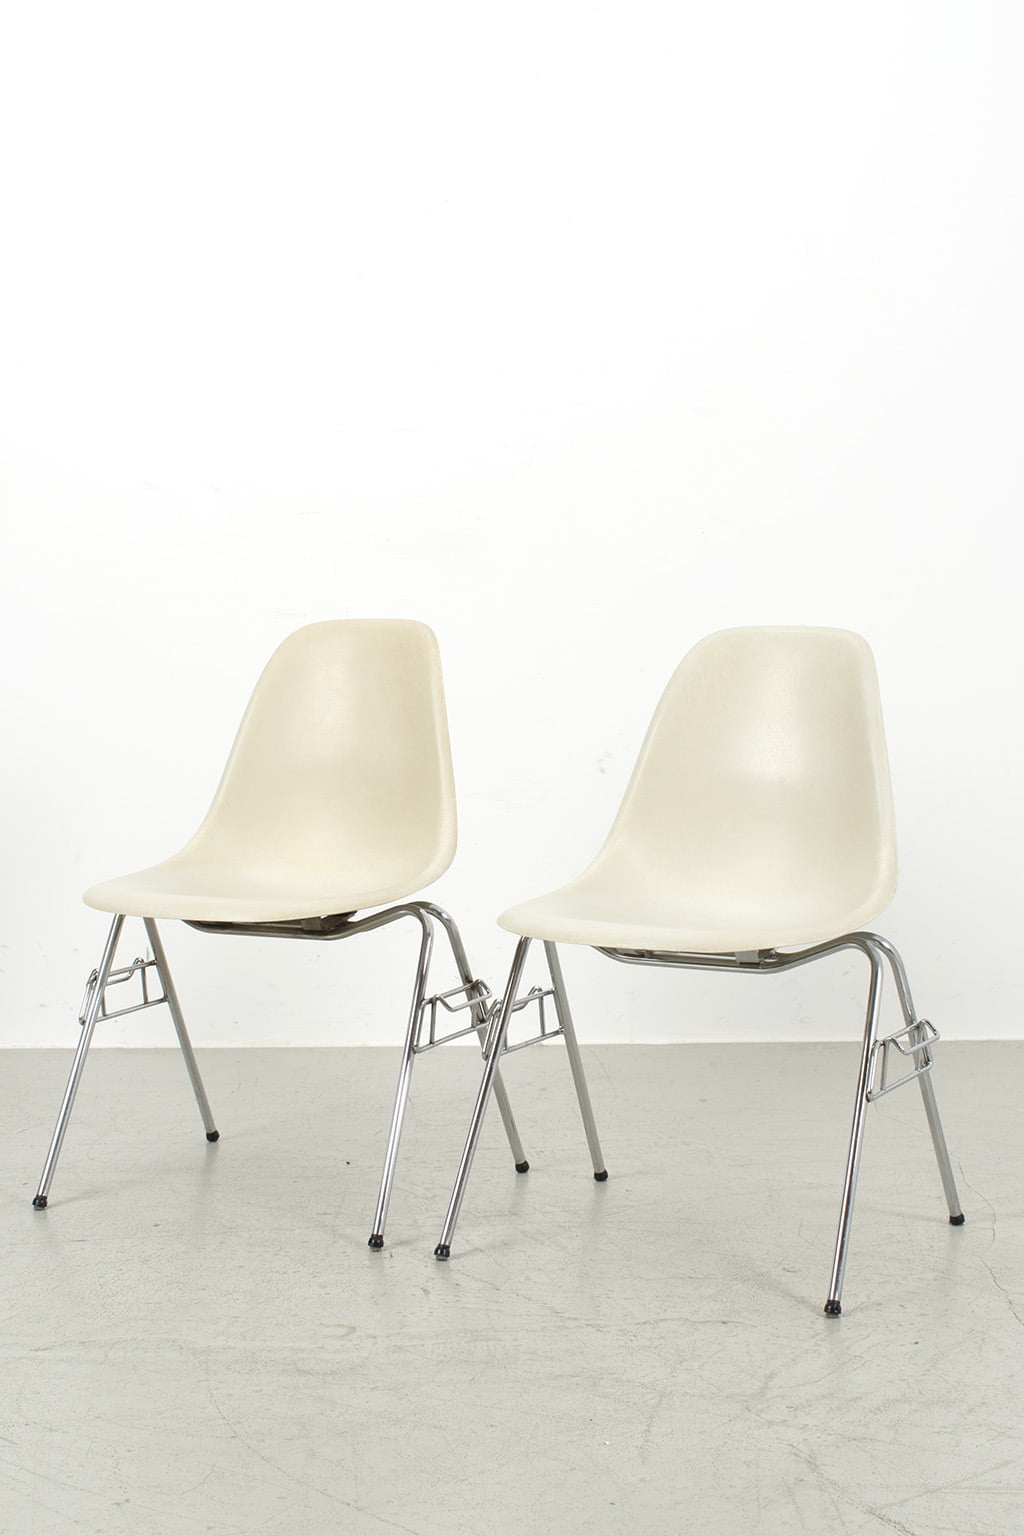 Eames DSS chairs